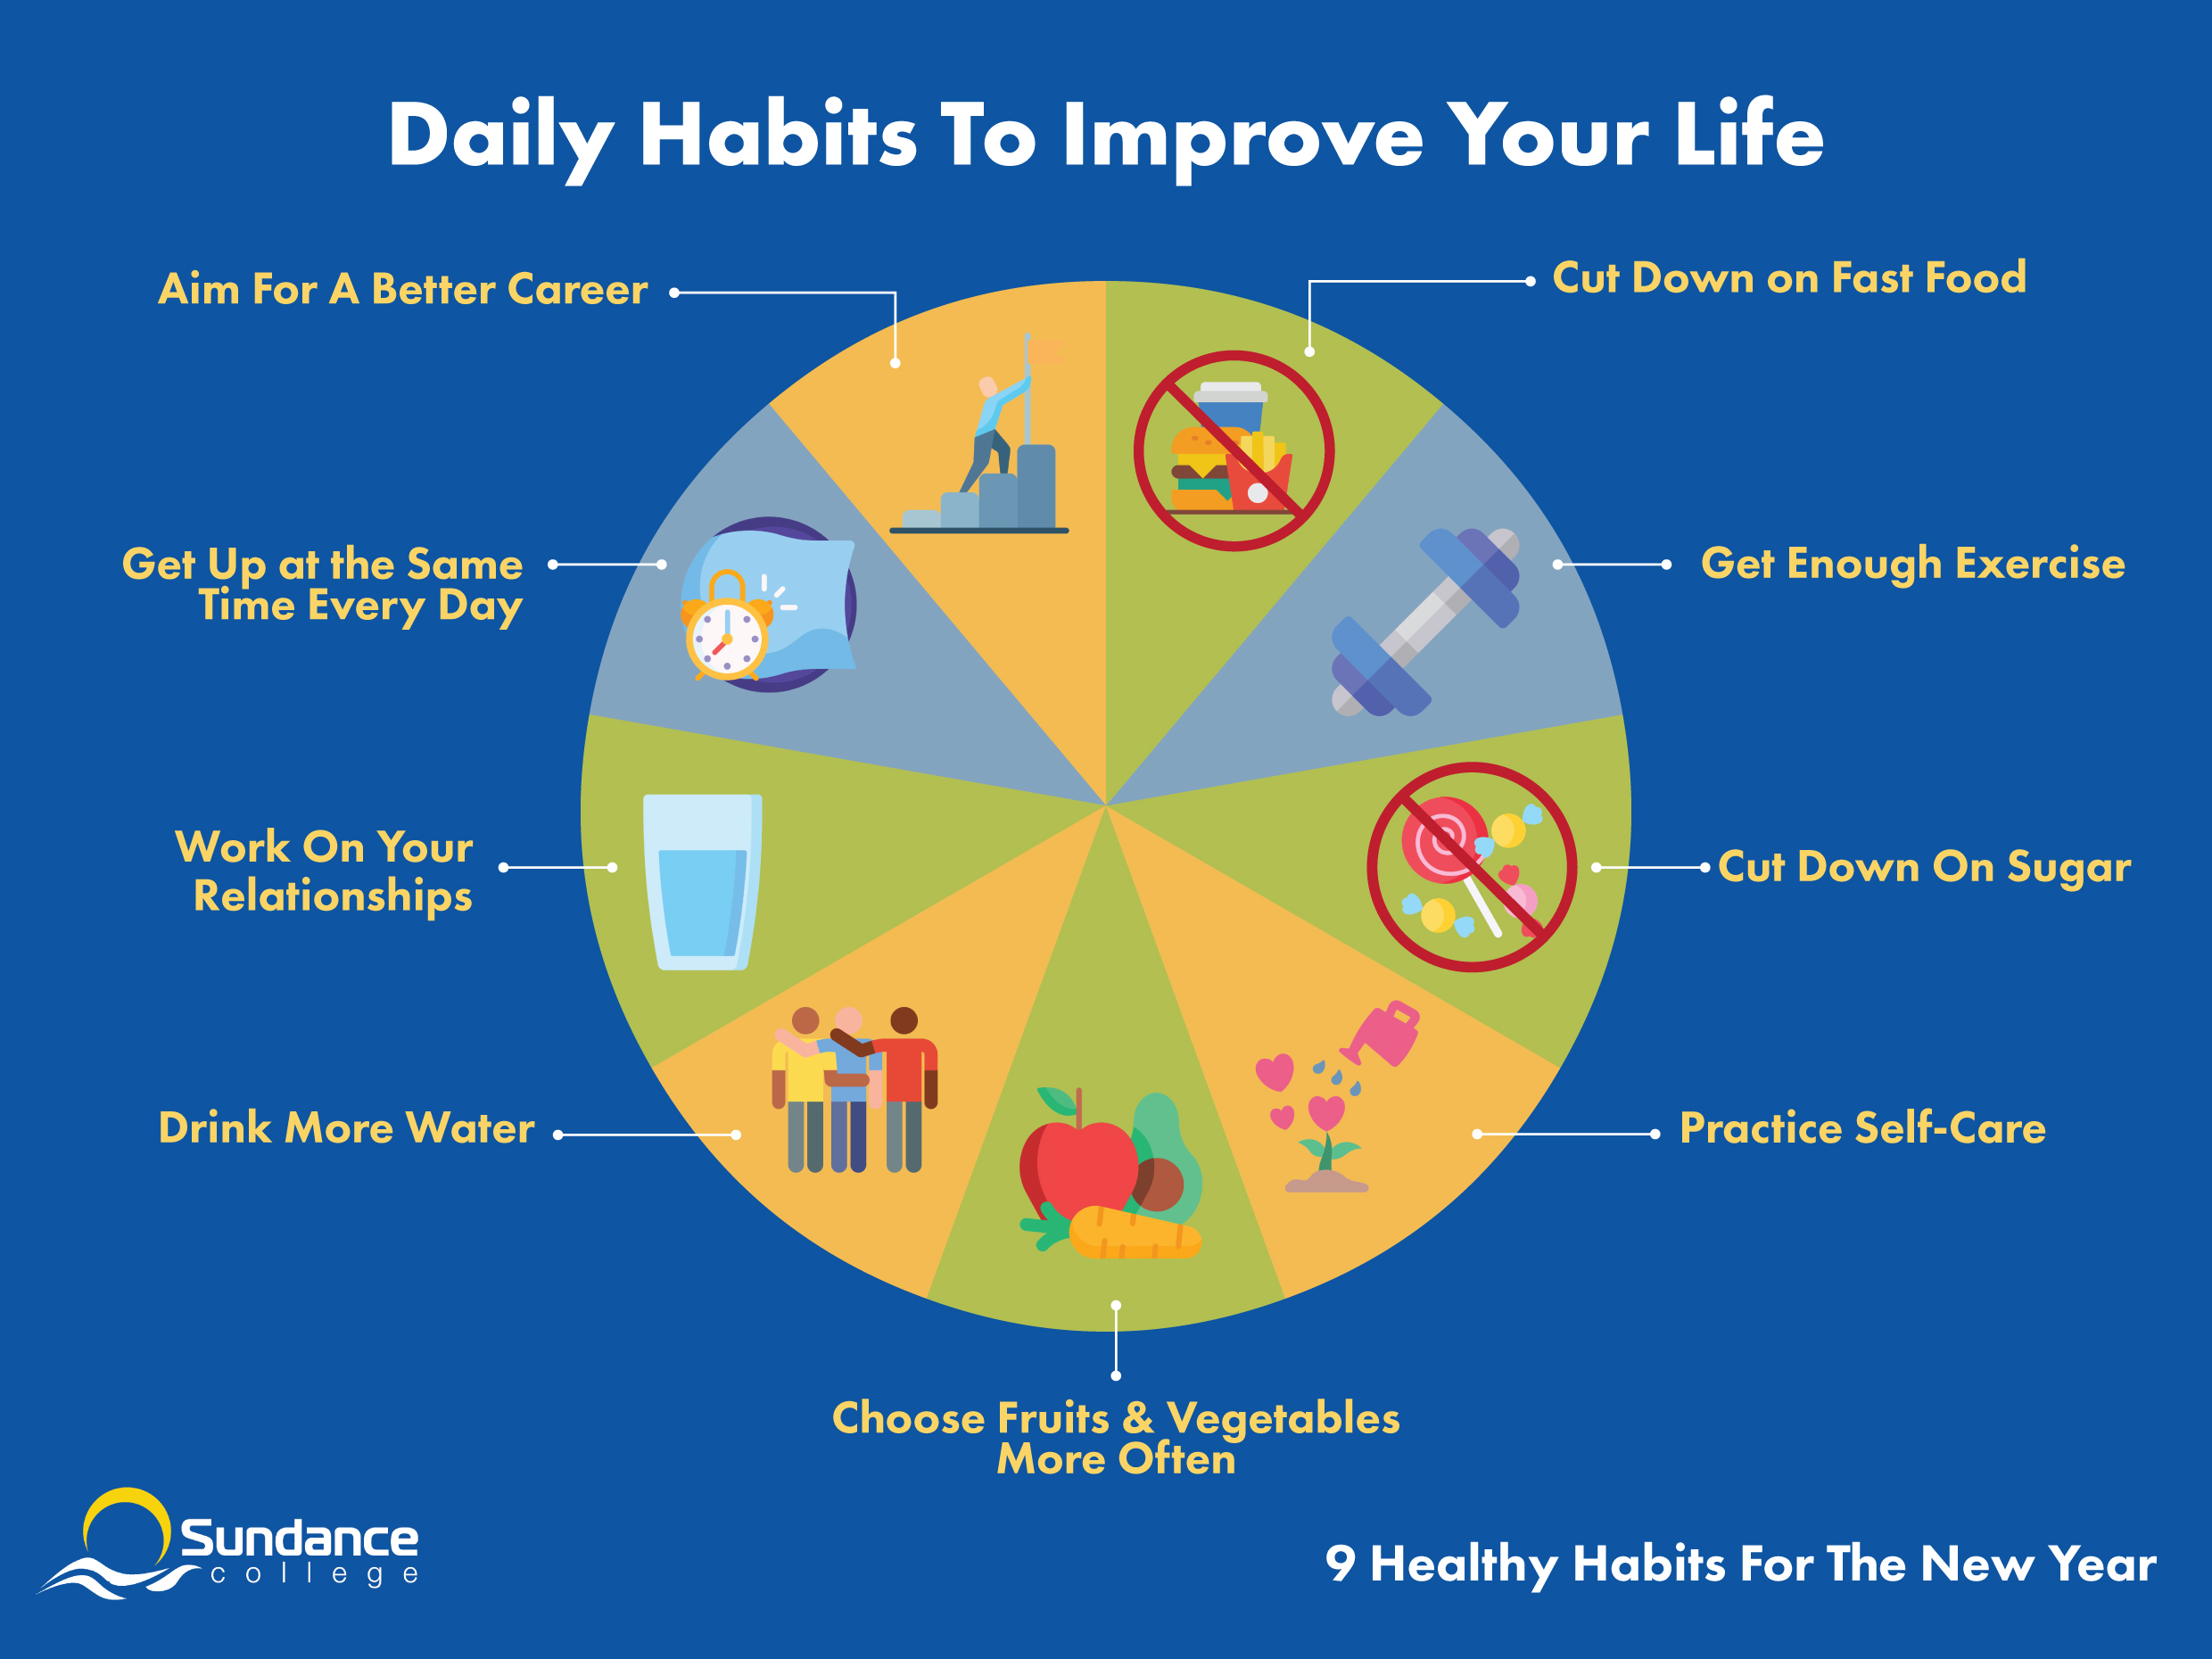 infographic depicting nine complementary healthy habits including cutting down on fast food and sugar, choosing fruits and vegetables more, drinking more water, getting enough exercise, practicing self care, working on your relationships, getting up at the same time every day, and aiming for a better career.